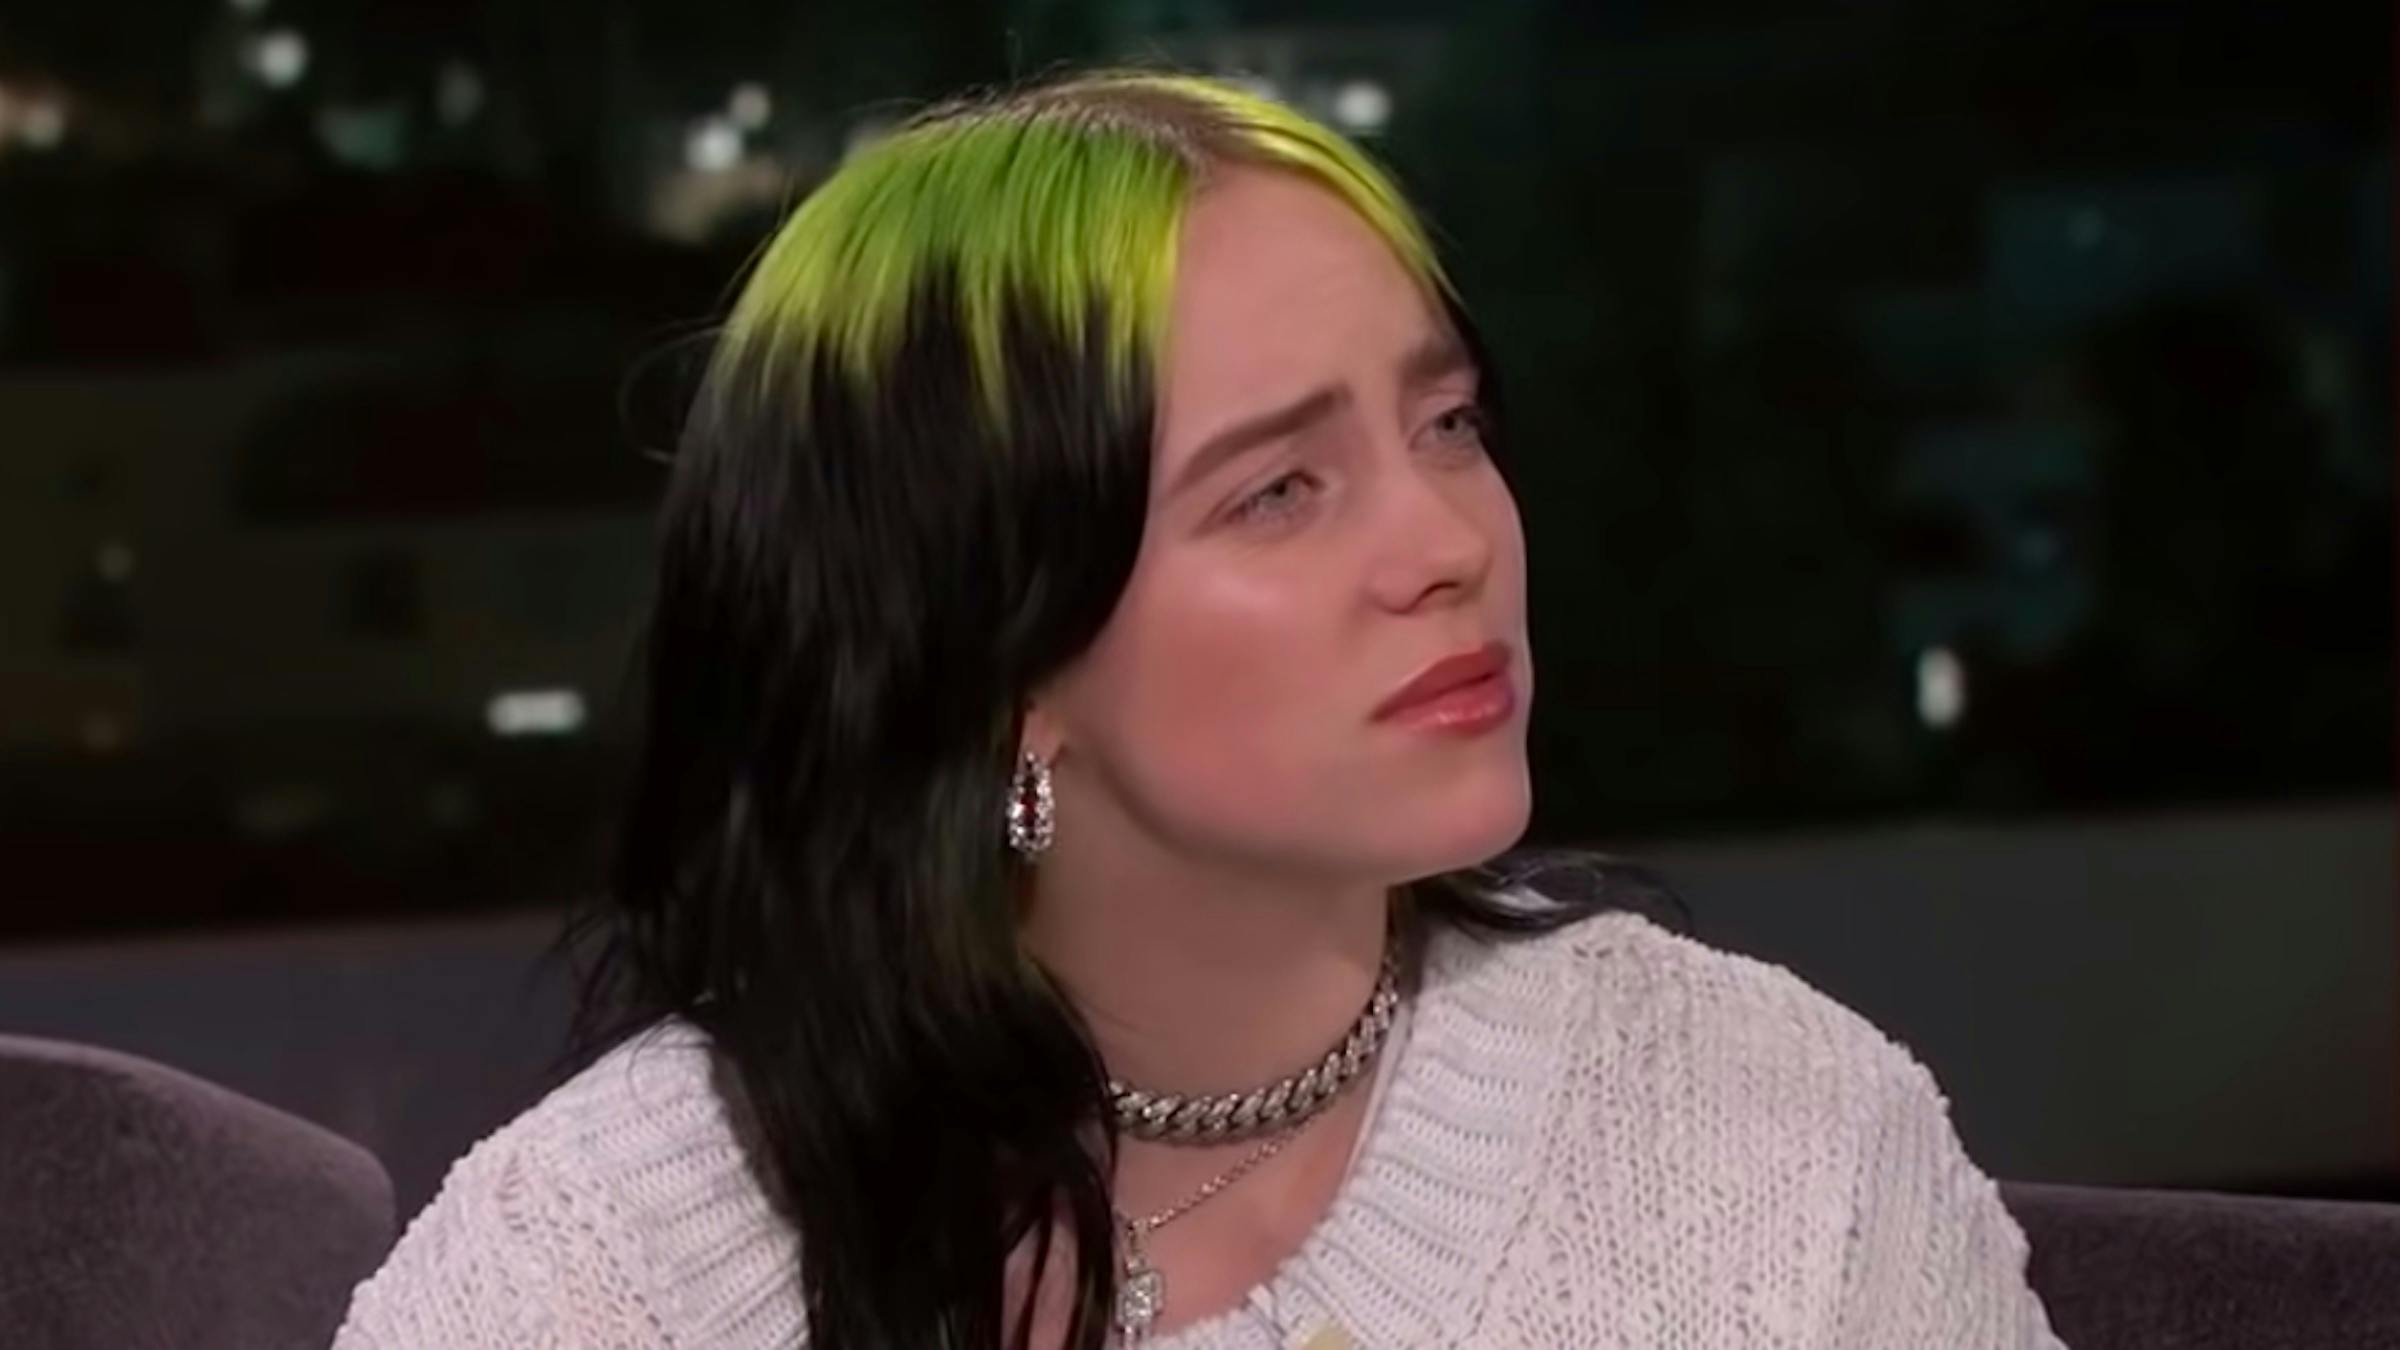 Van Halen Defends Billie Eilish For Not Knowing Who They Are